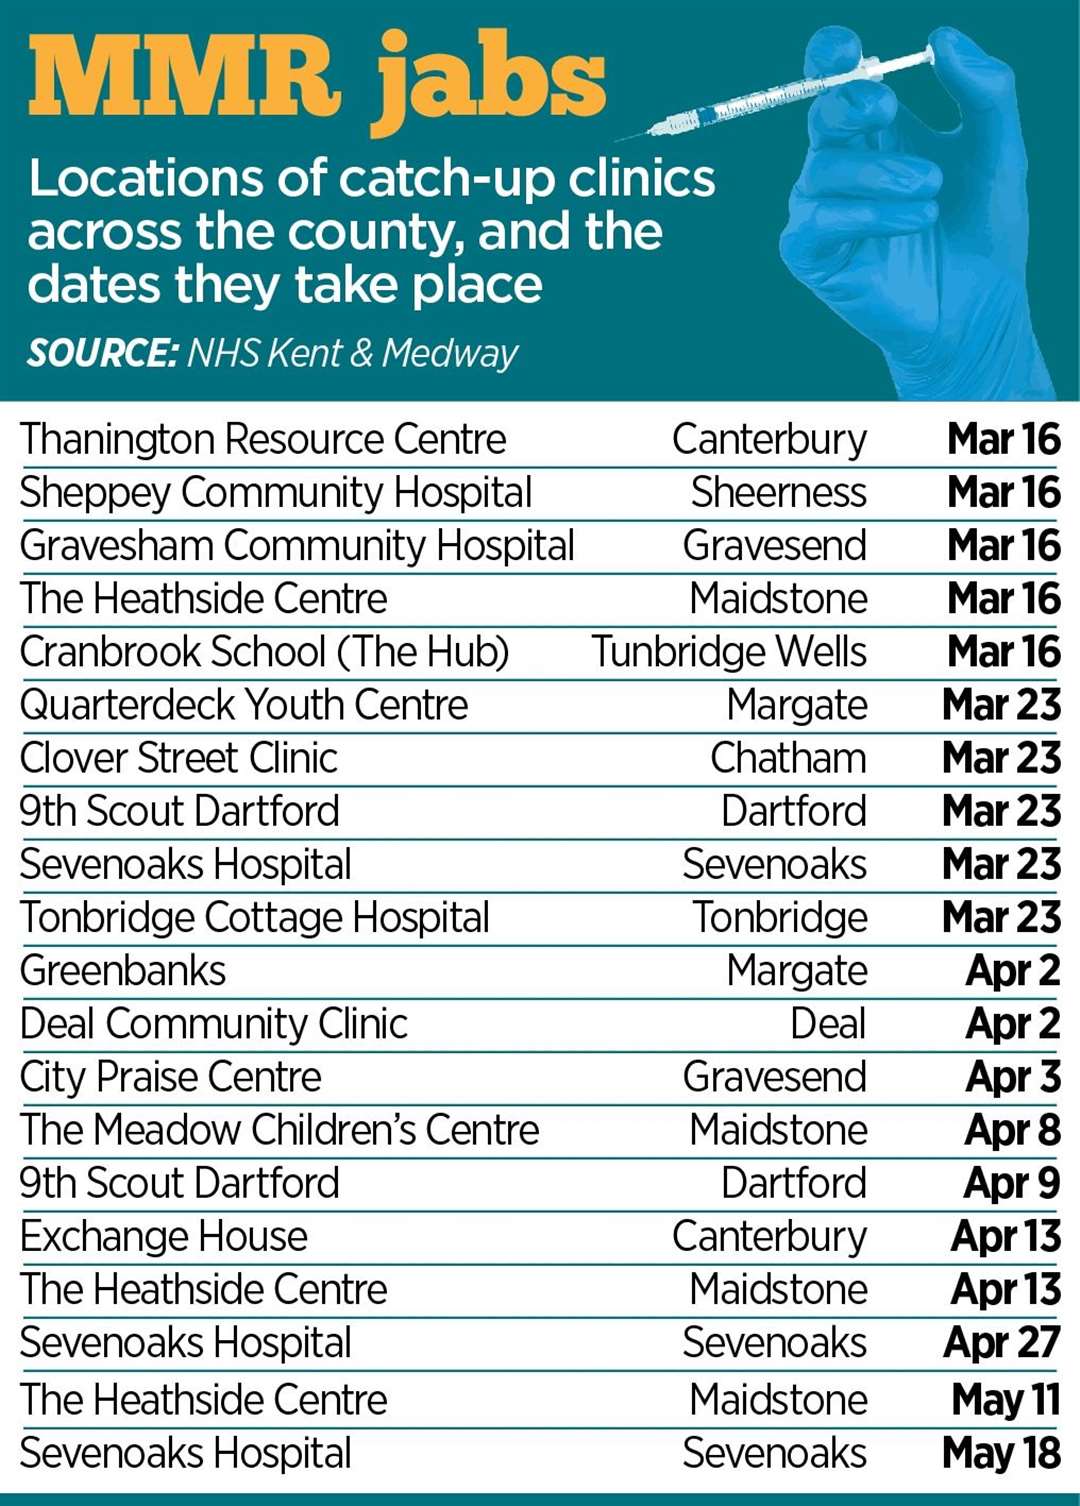 The locations of upcoming sping catch-up clinics